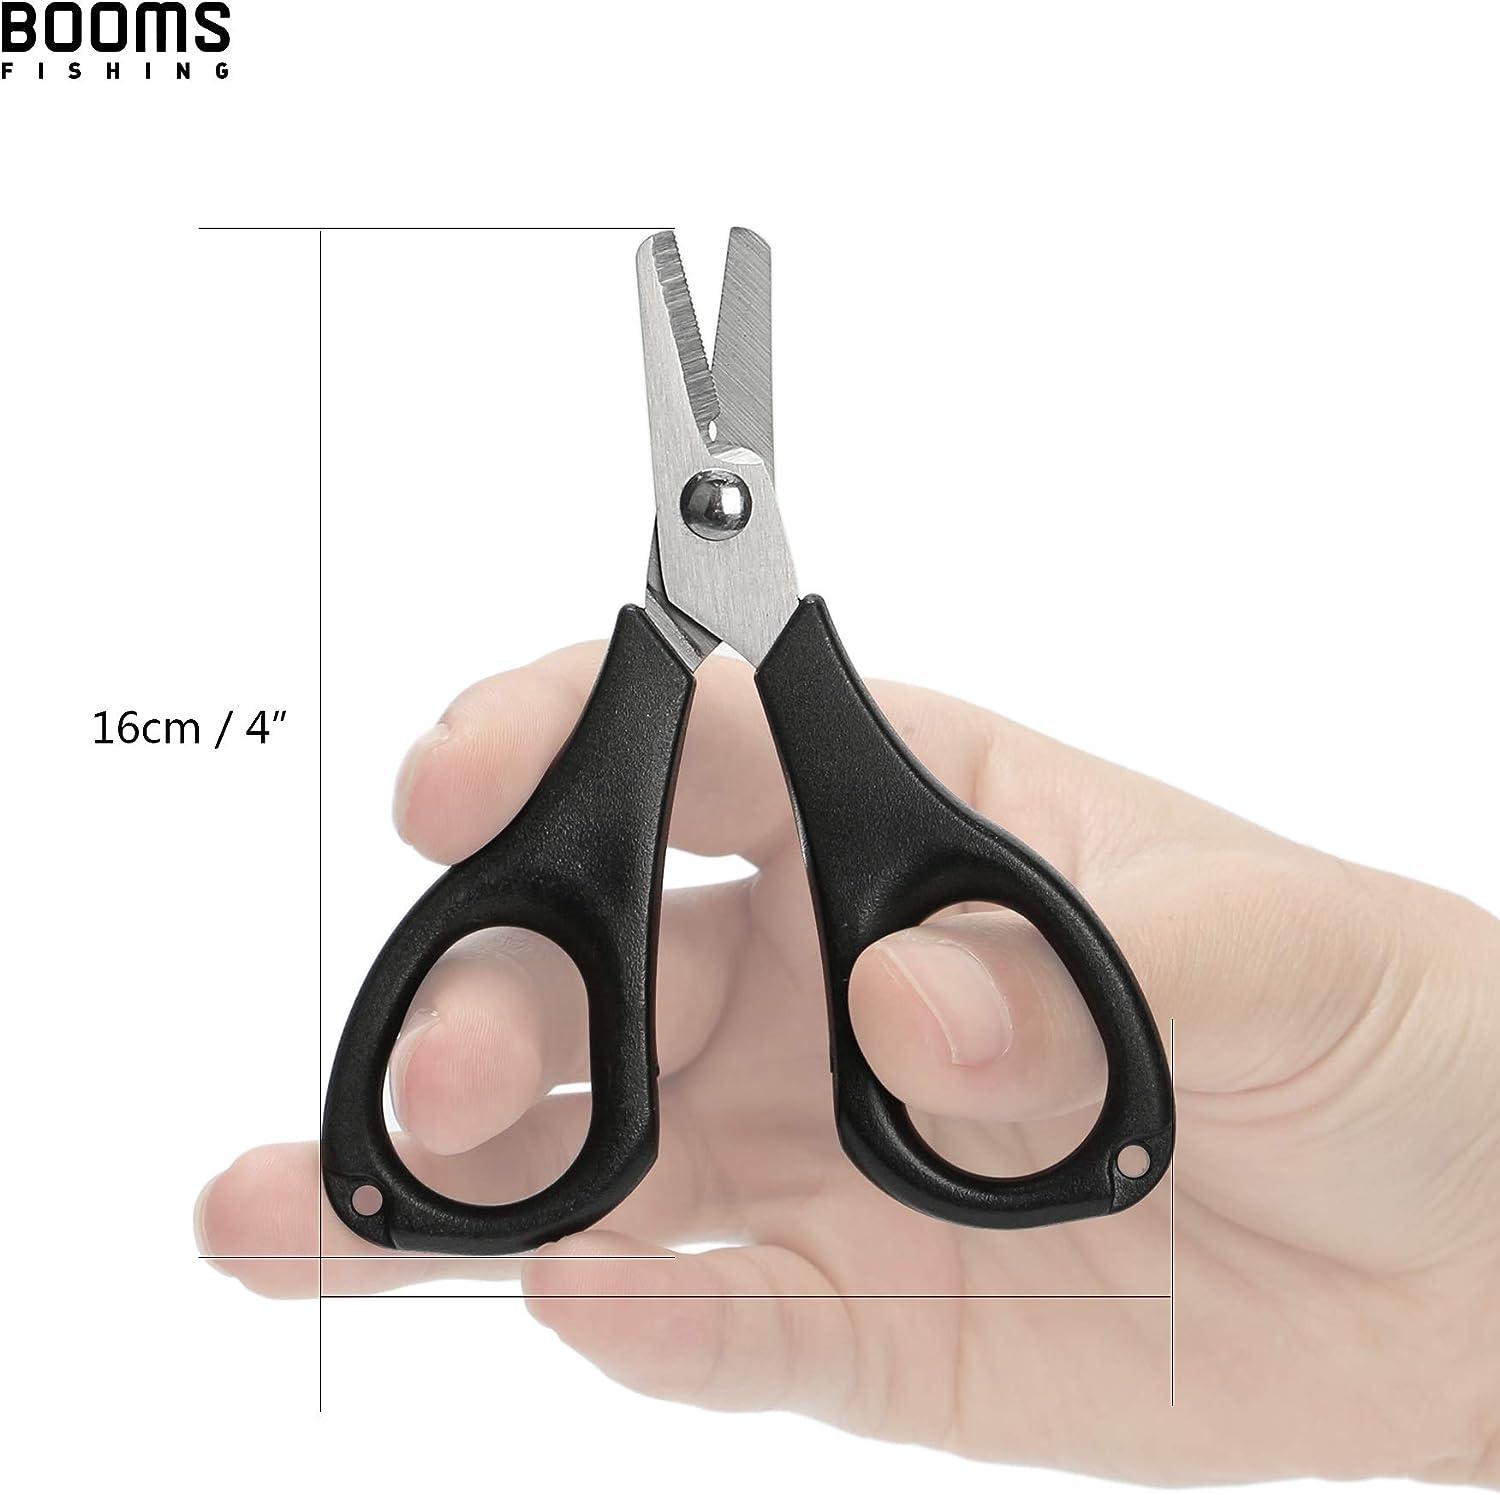 Booms Fishing FC2 Fishing Knot Tying Tool, Fly Fshing Line Cutter, Fishing  Clippers with Retractor Black